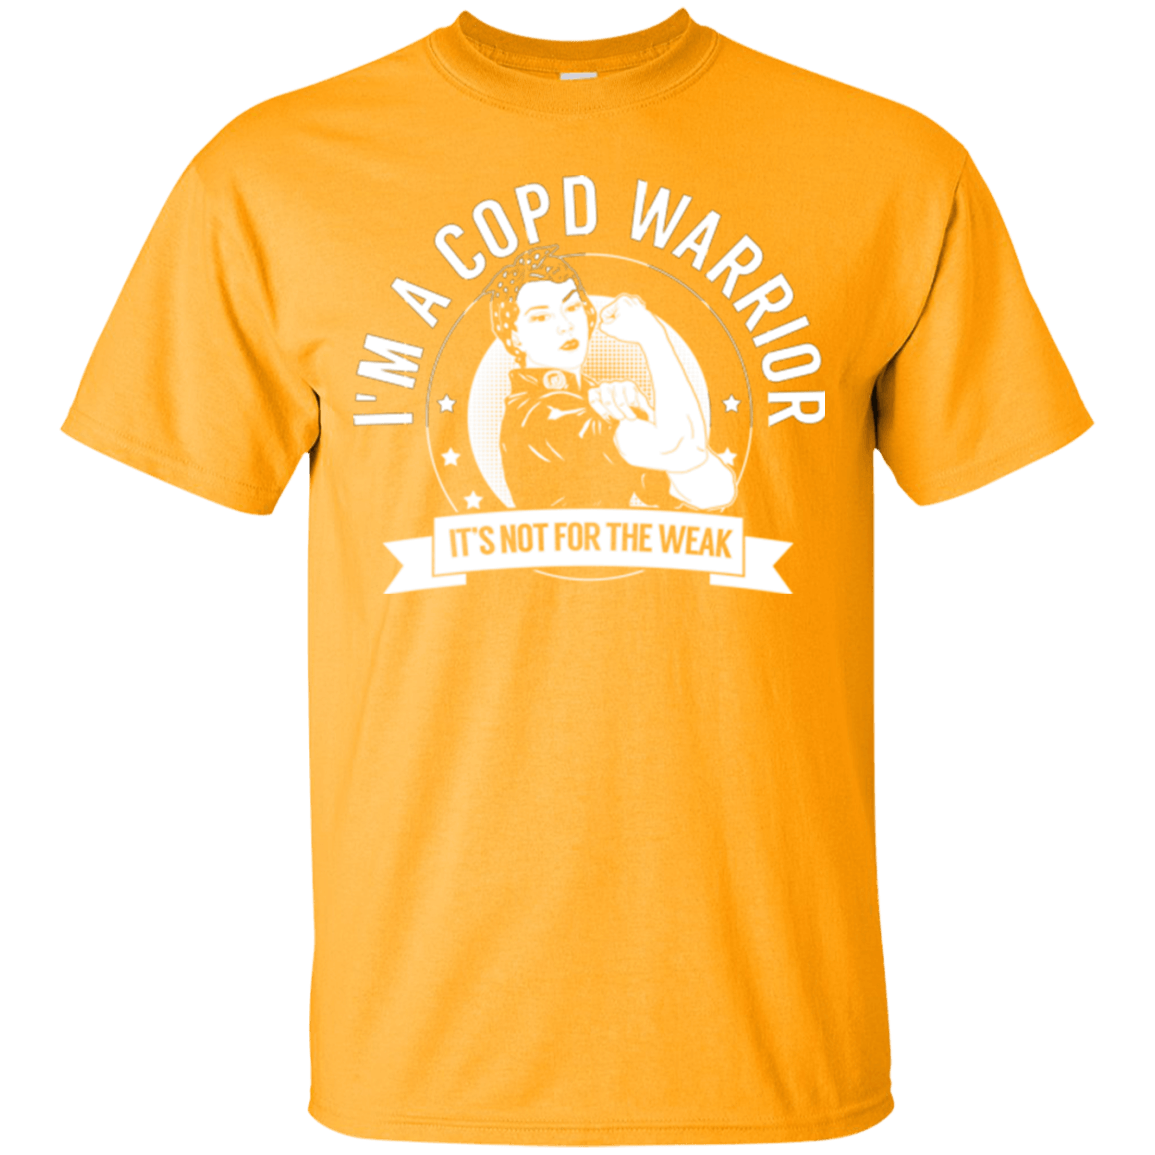 Chronic Obstructive Pulmonary Disease - COPD Warrior Not For The Weak Unisex Shirt - The Unchargeables